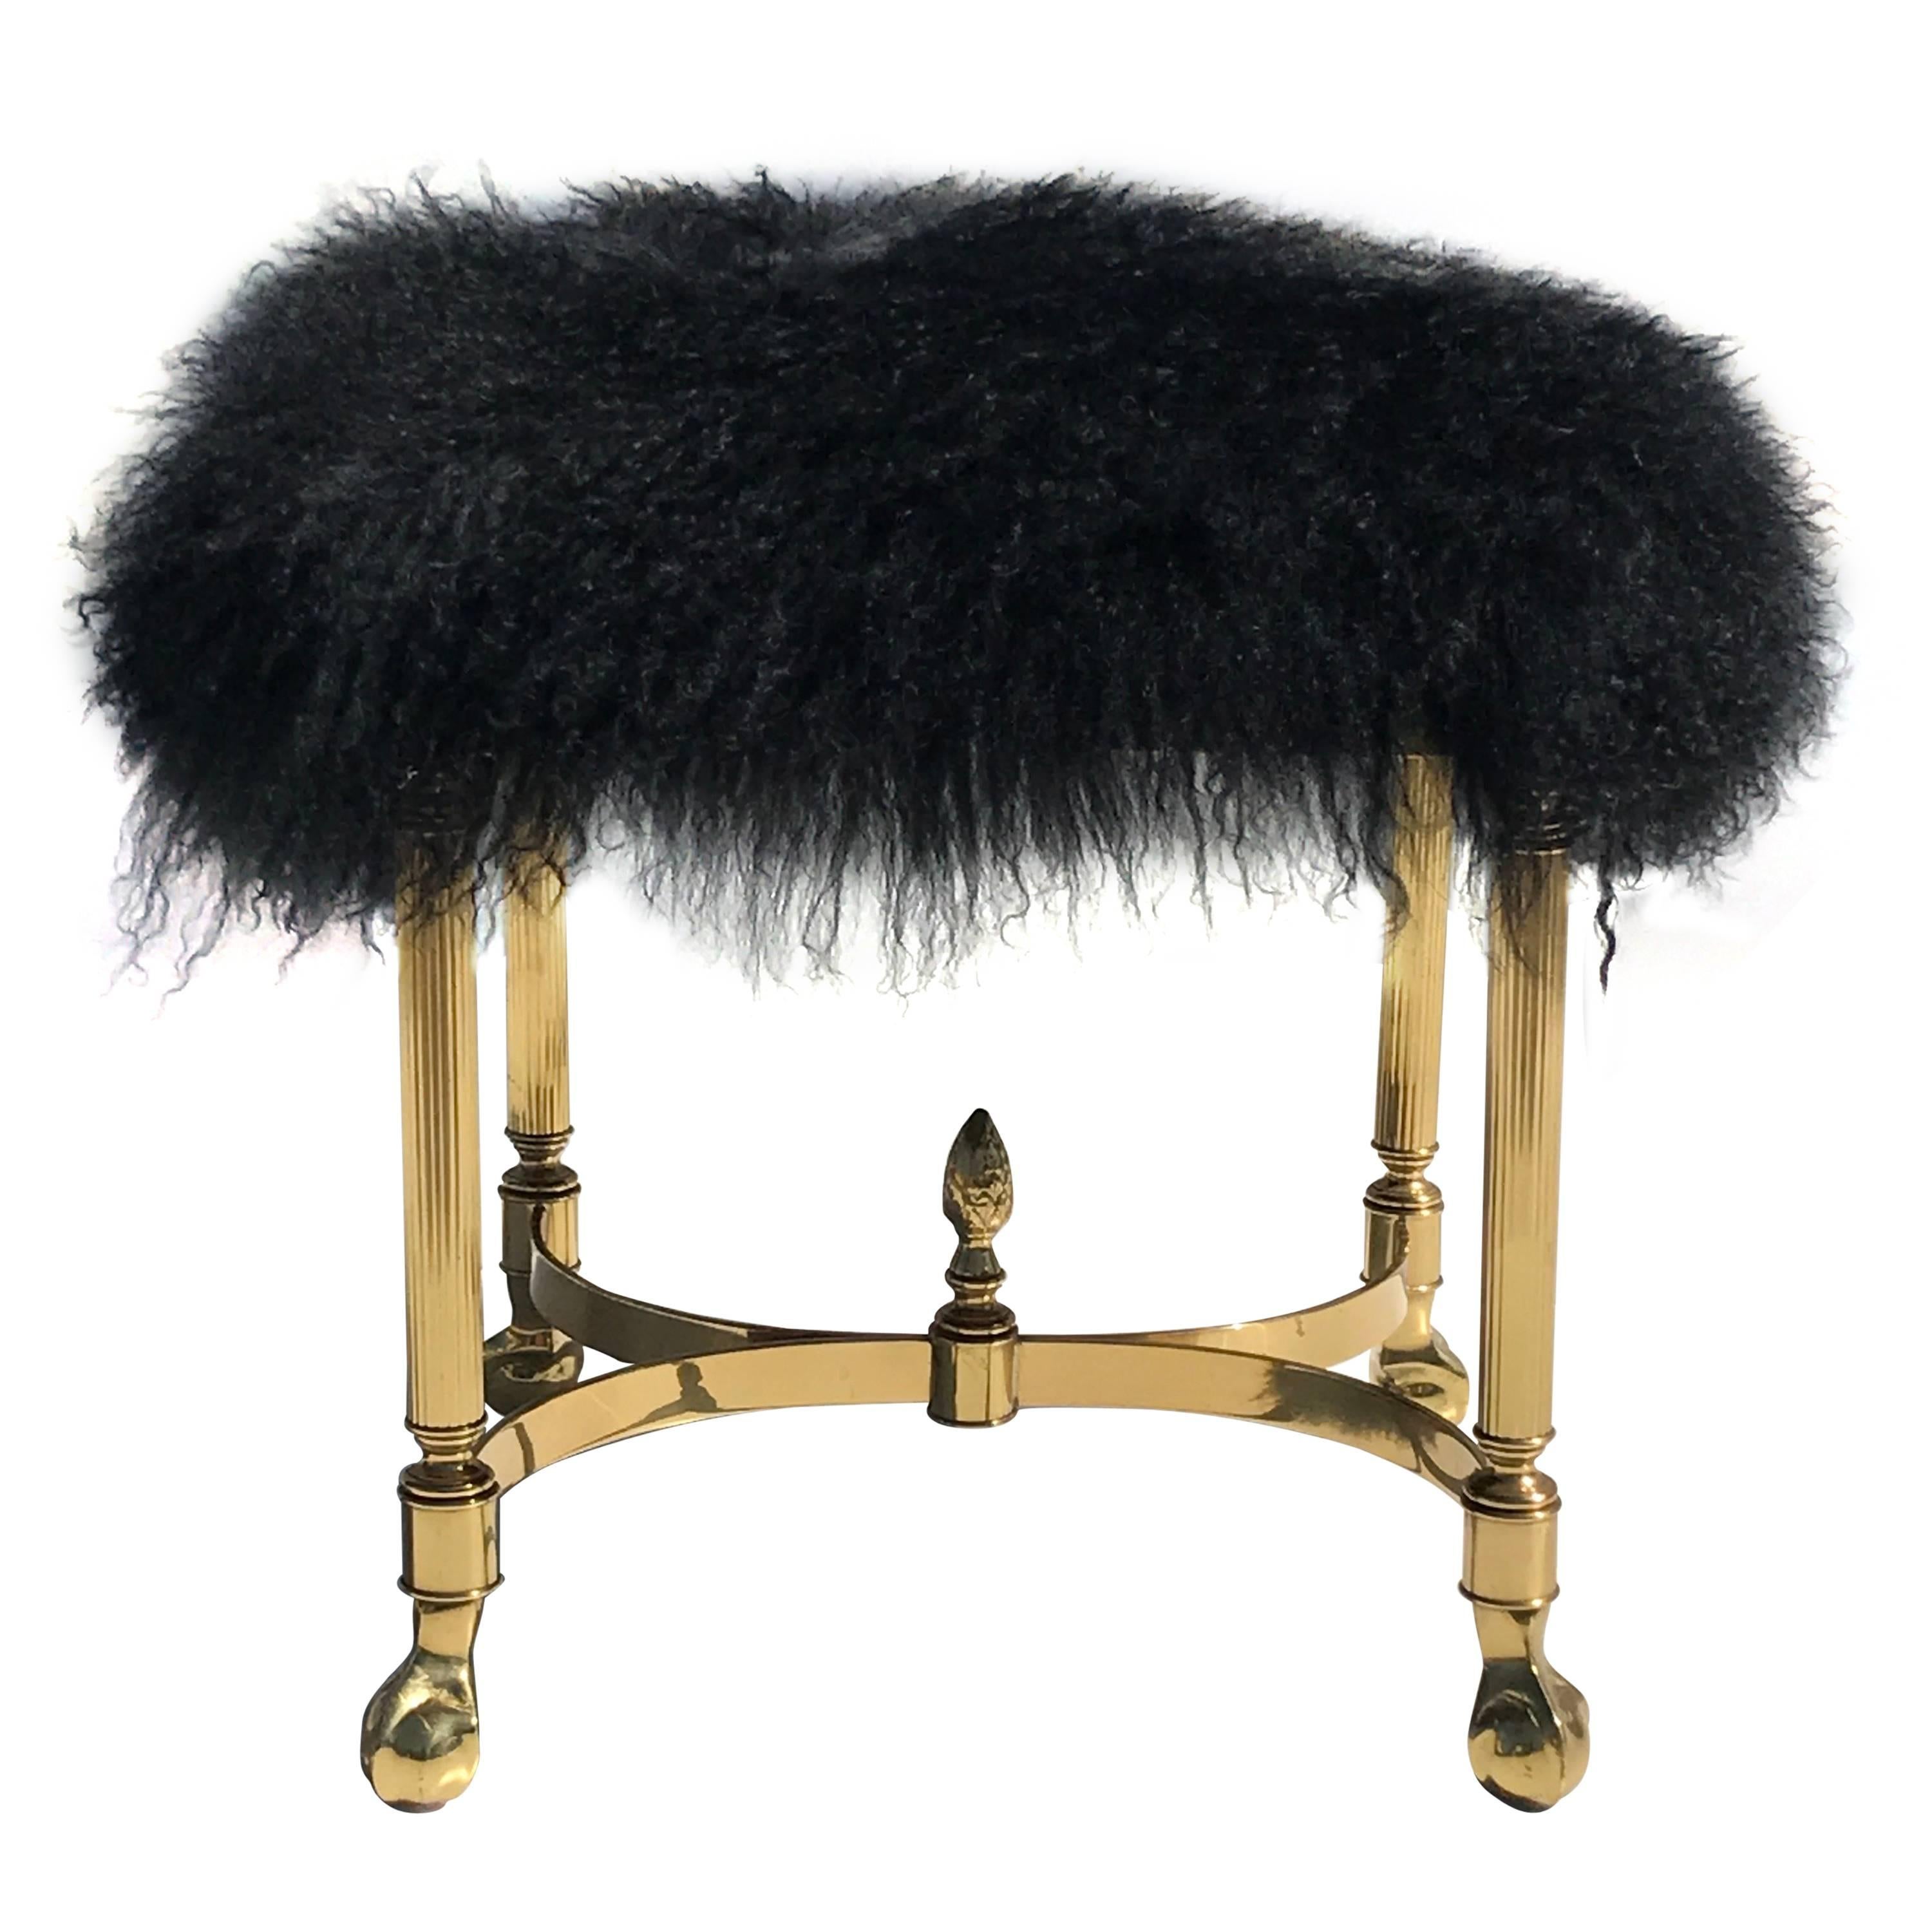 Petit Brass Footrest or Bench with Mongolian Wool